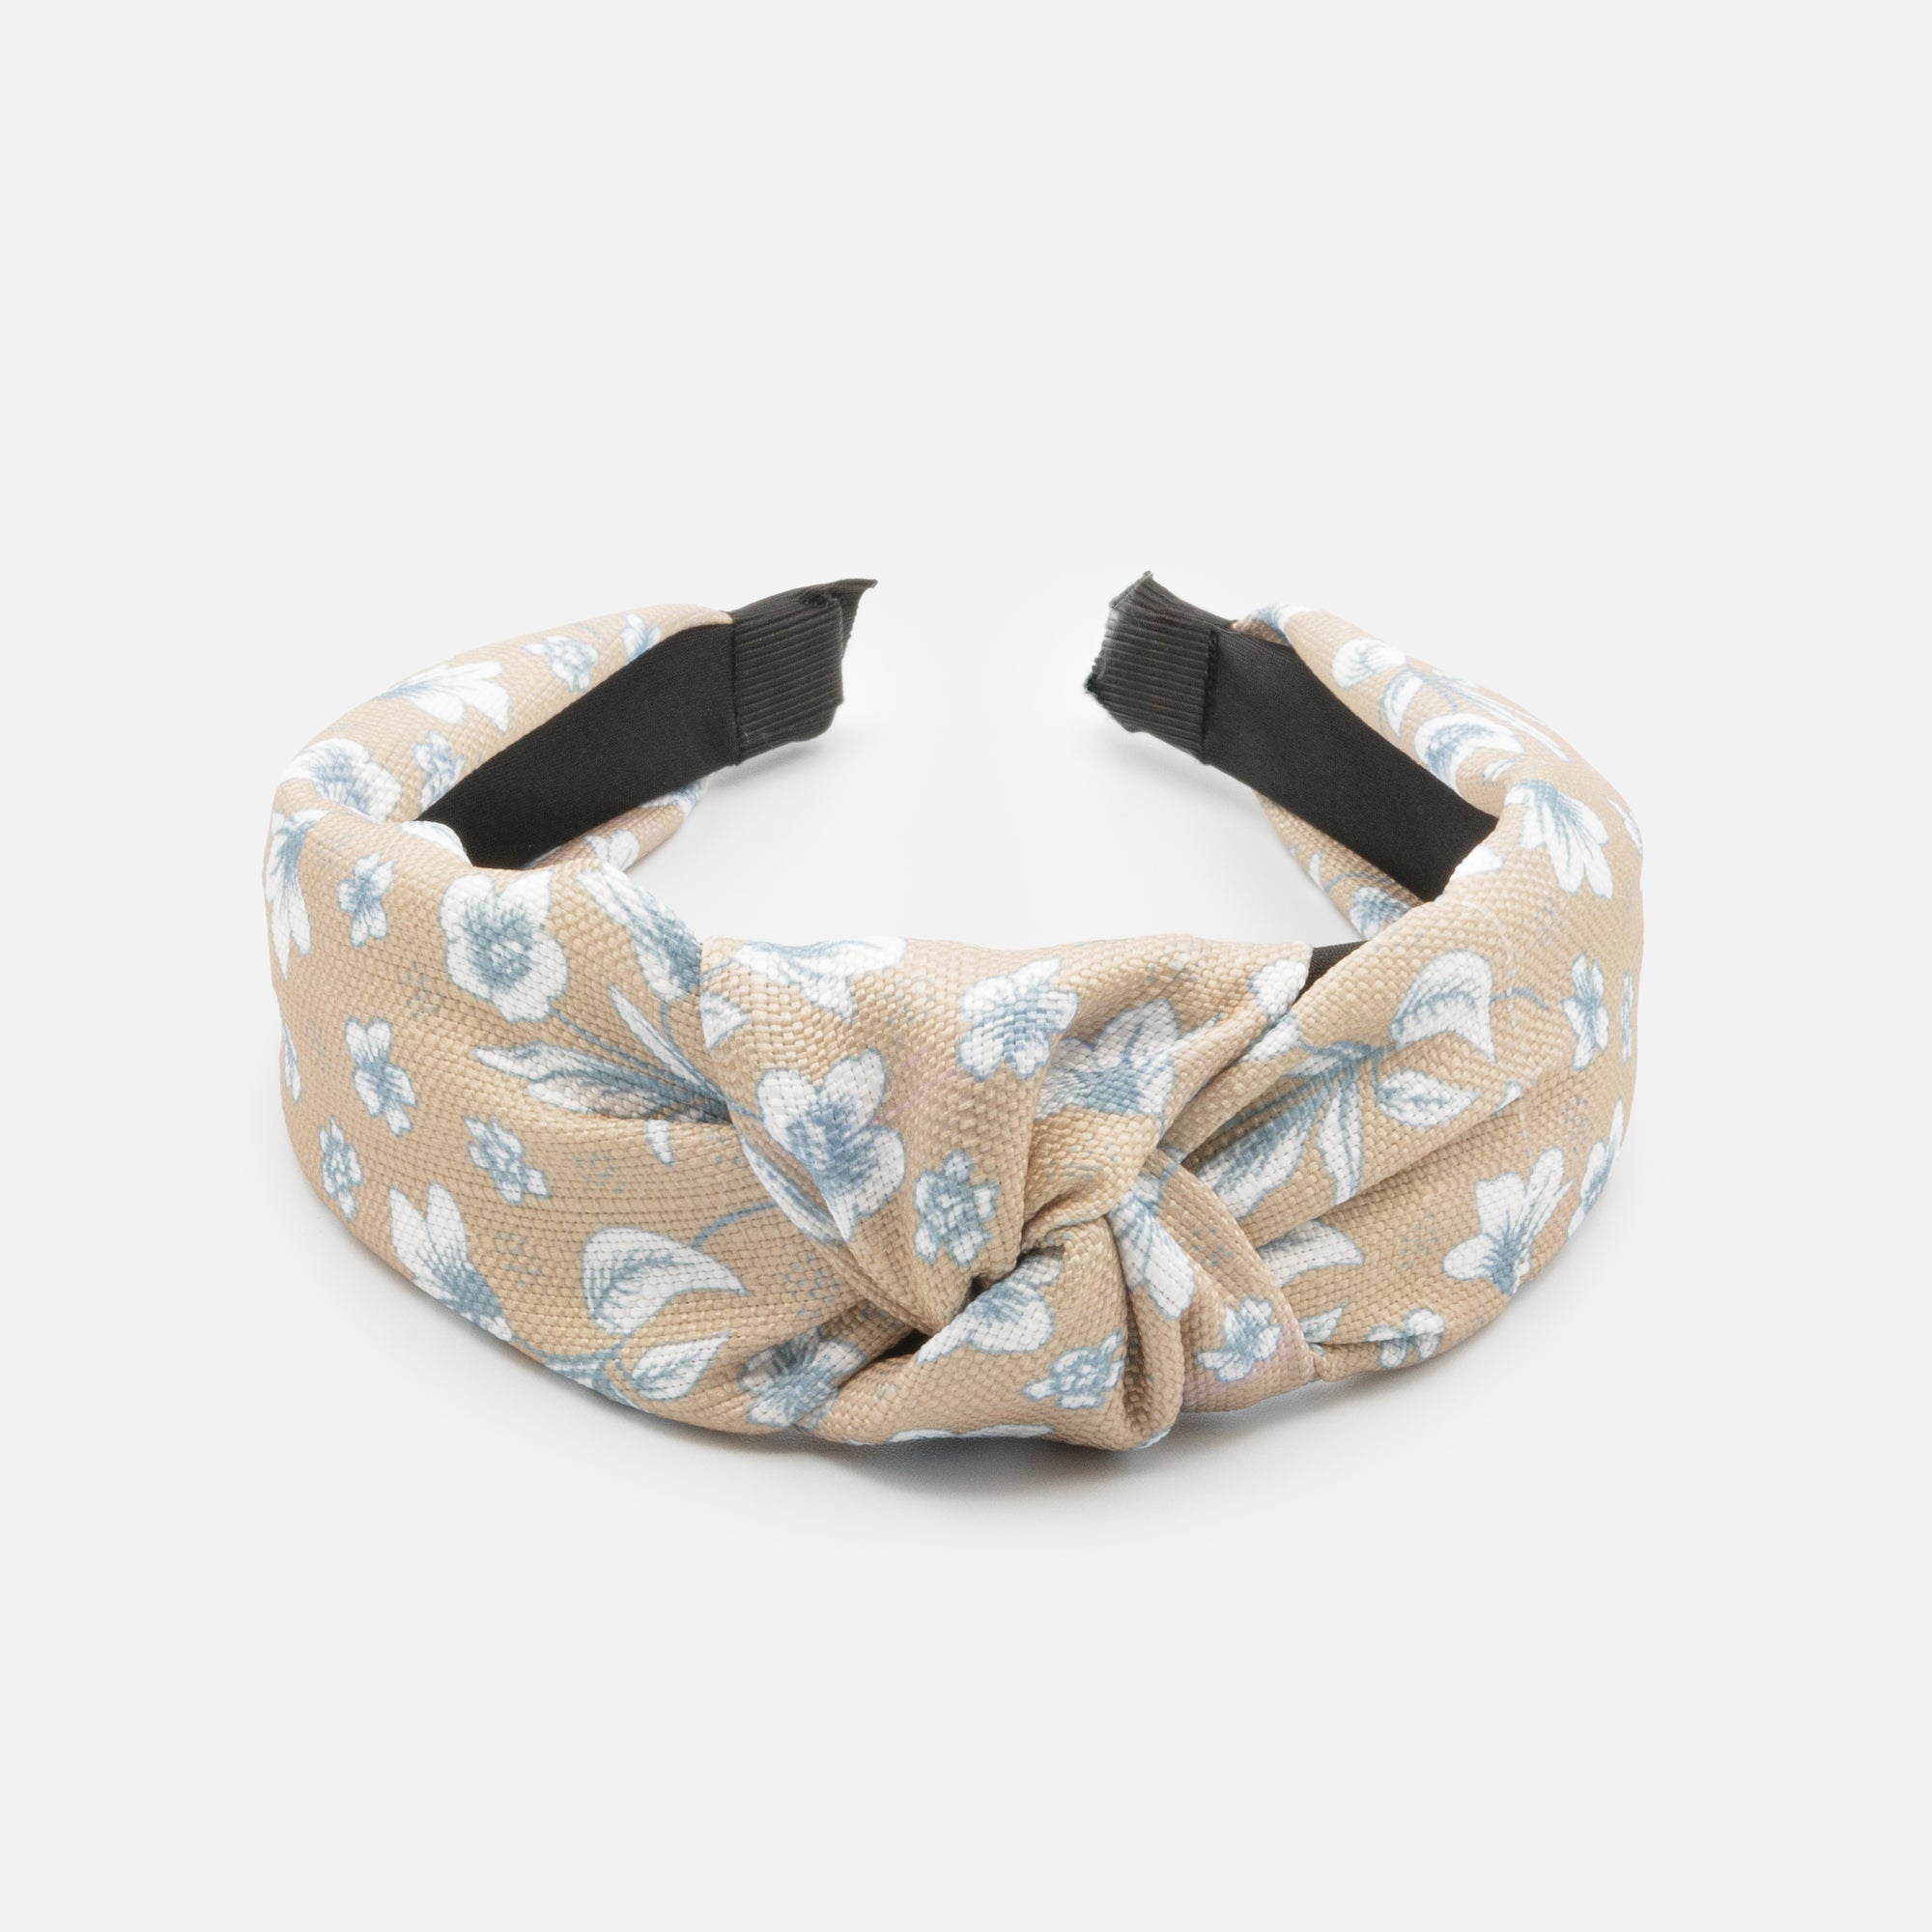 Beige headband with blue-gray flowers and bow